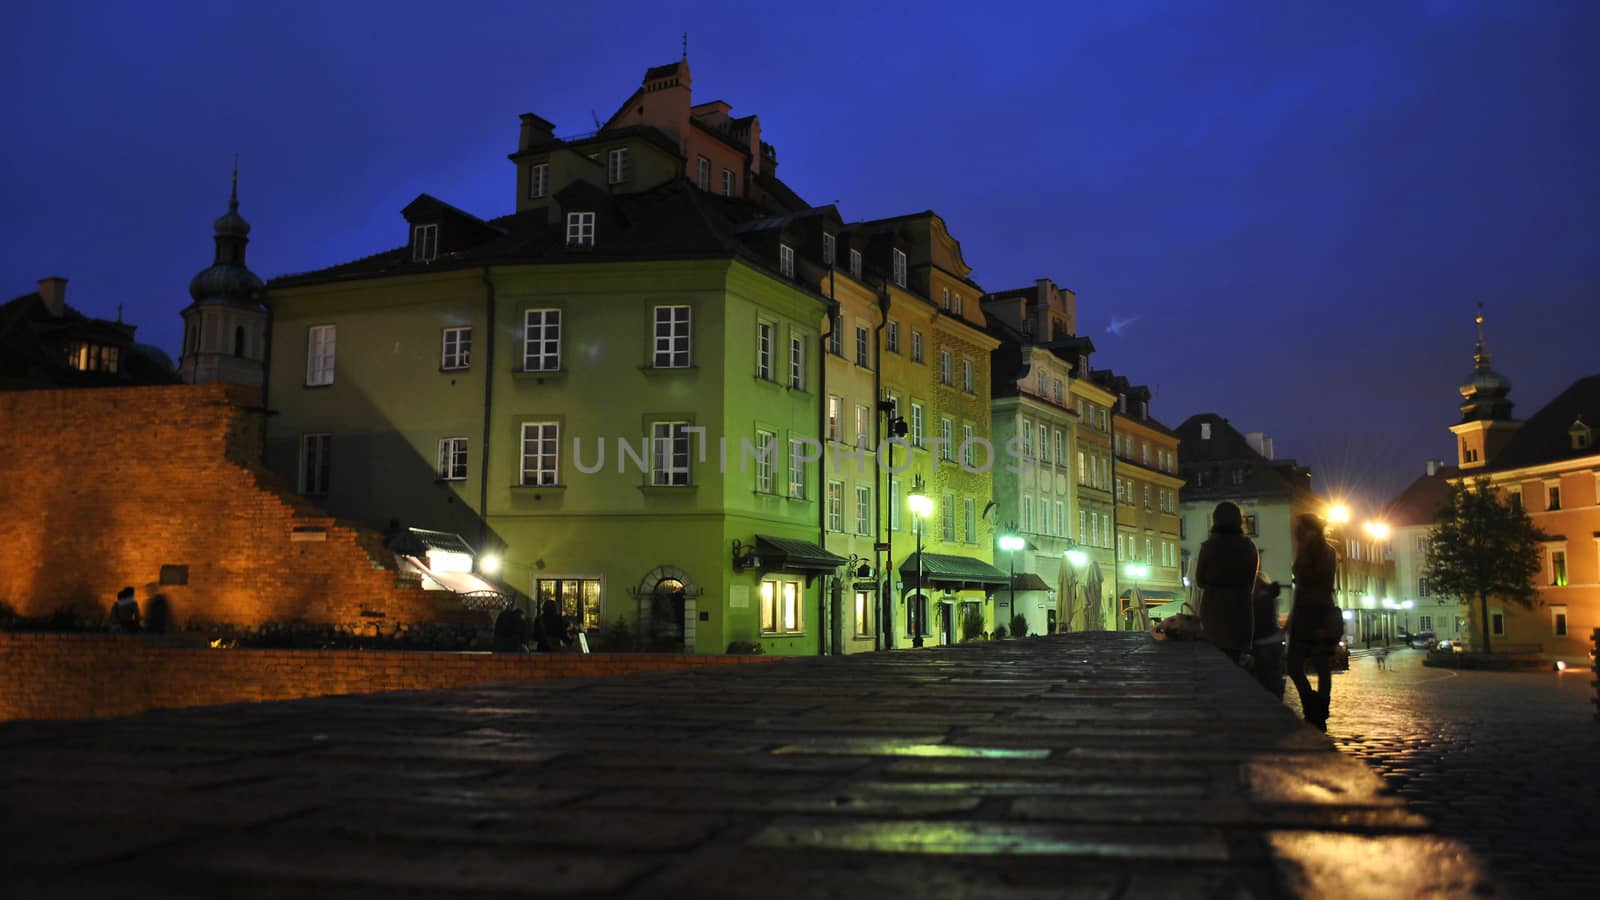 Old streets in the historic center of Warsaw in the evening